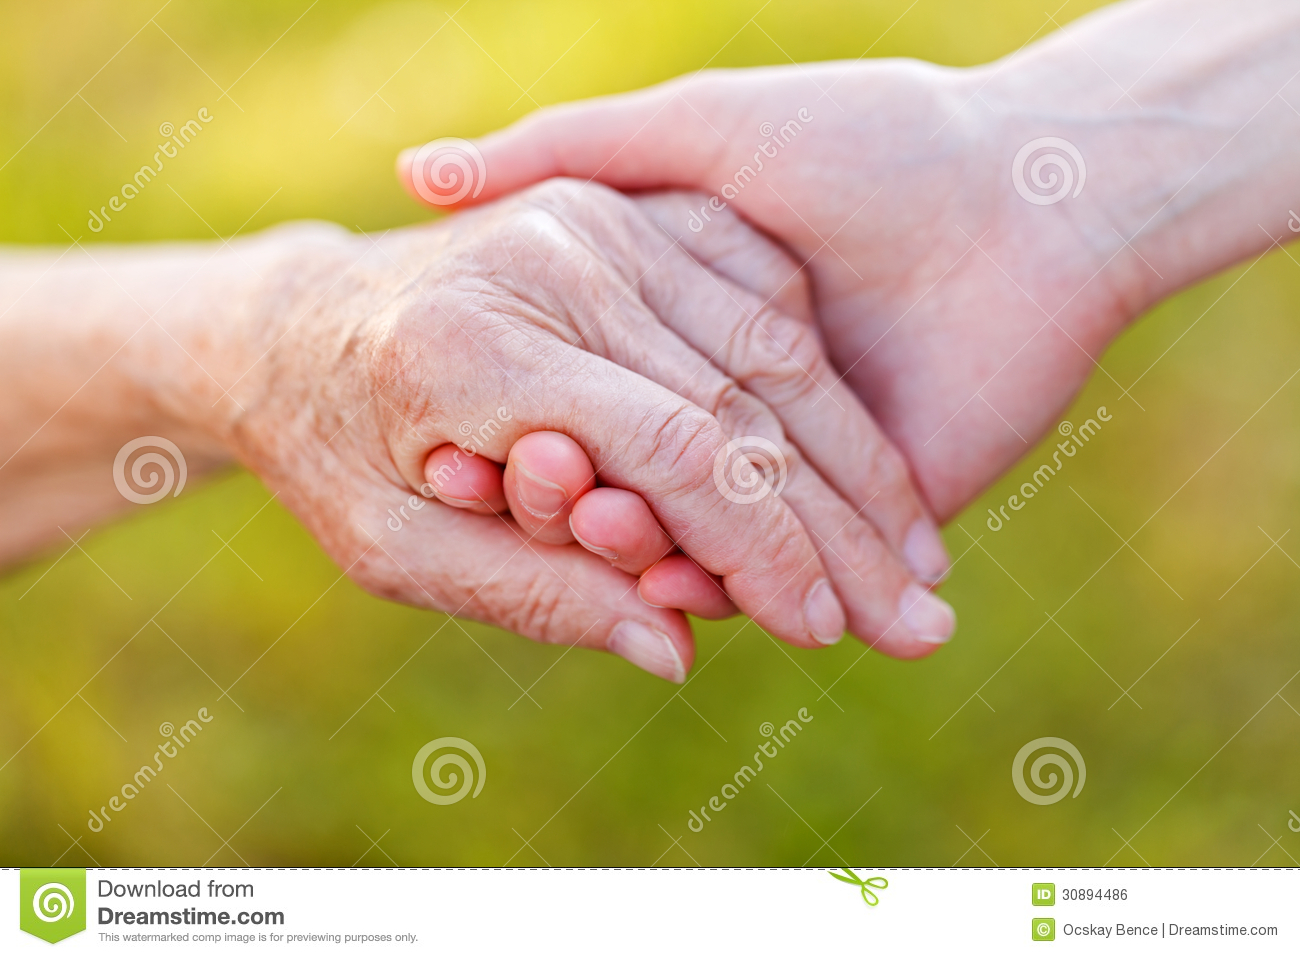 Helping Hands Royalty Free Stock Image   Image  30894486